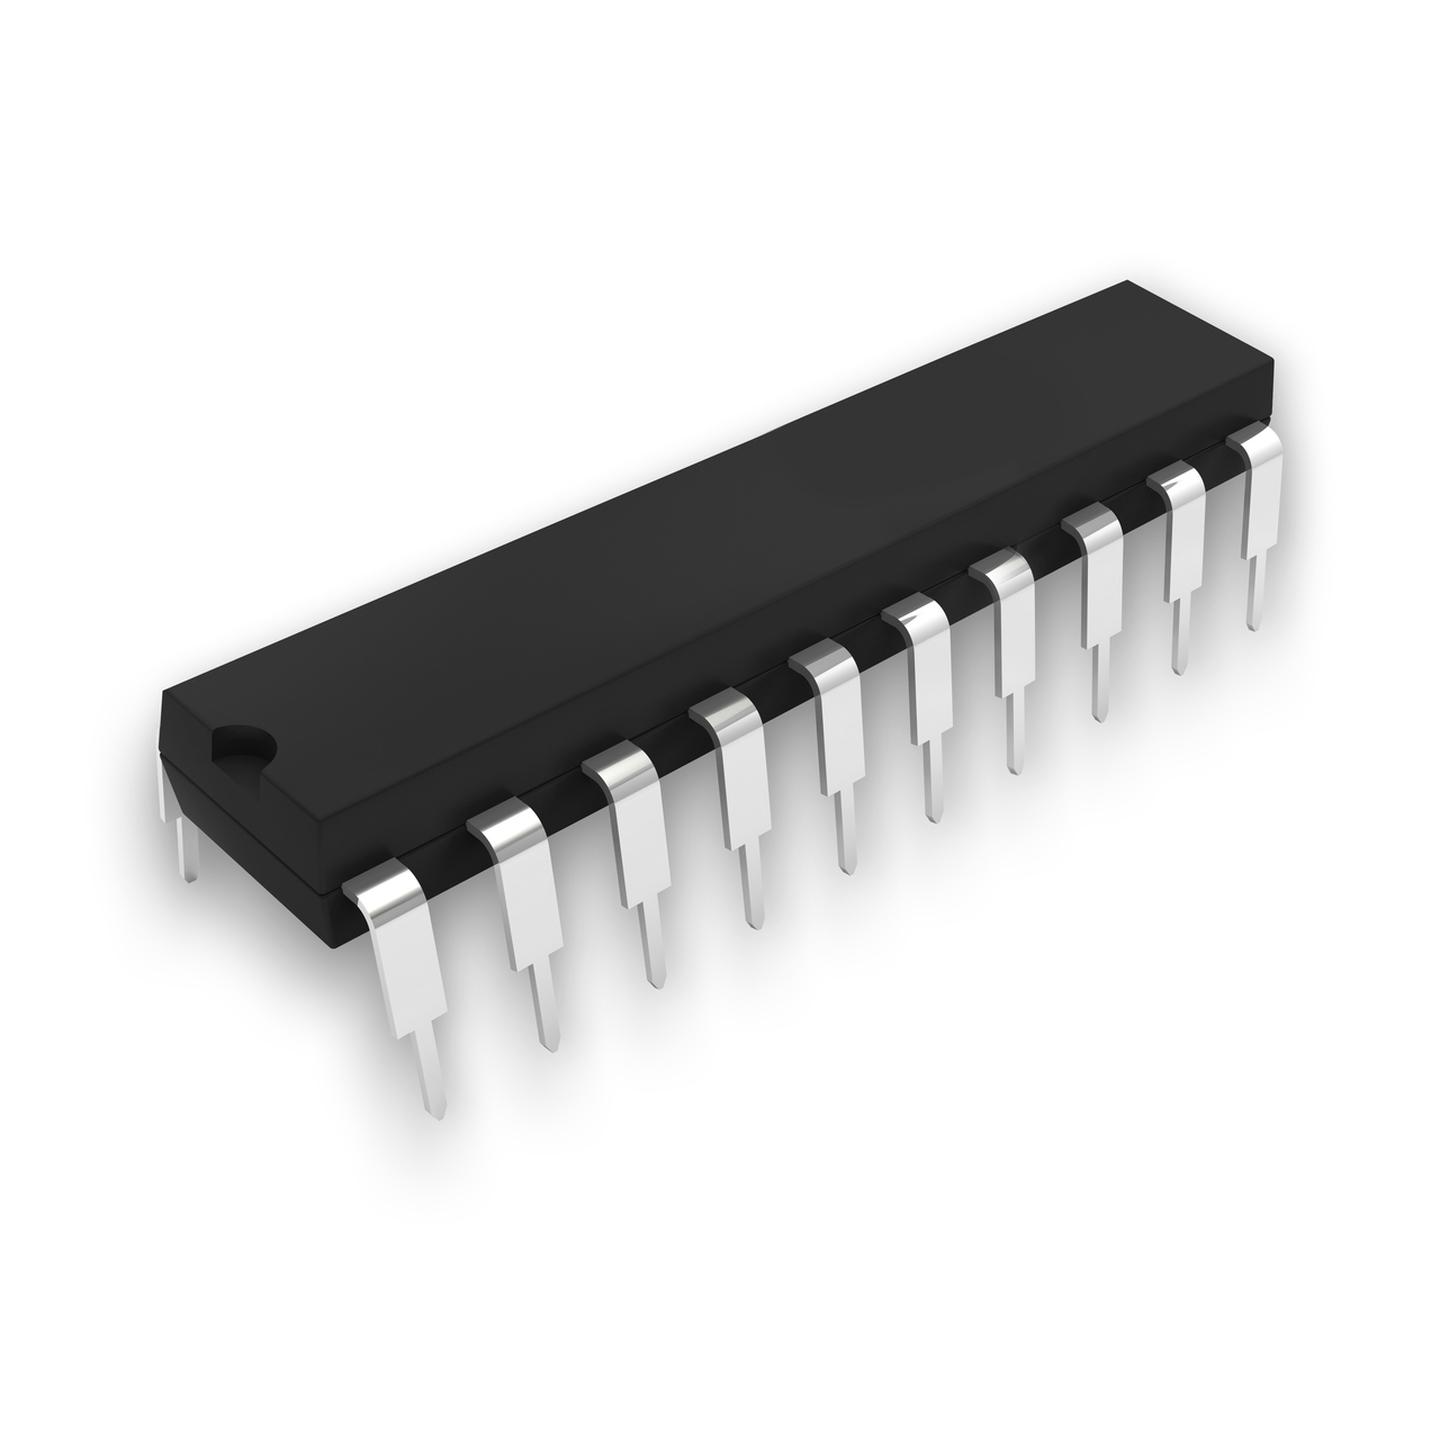 ADC0804 Analogue to Digital Converter IC